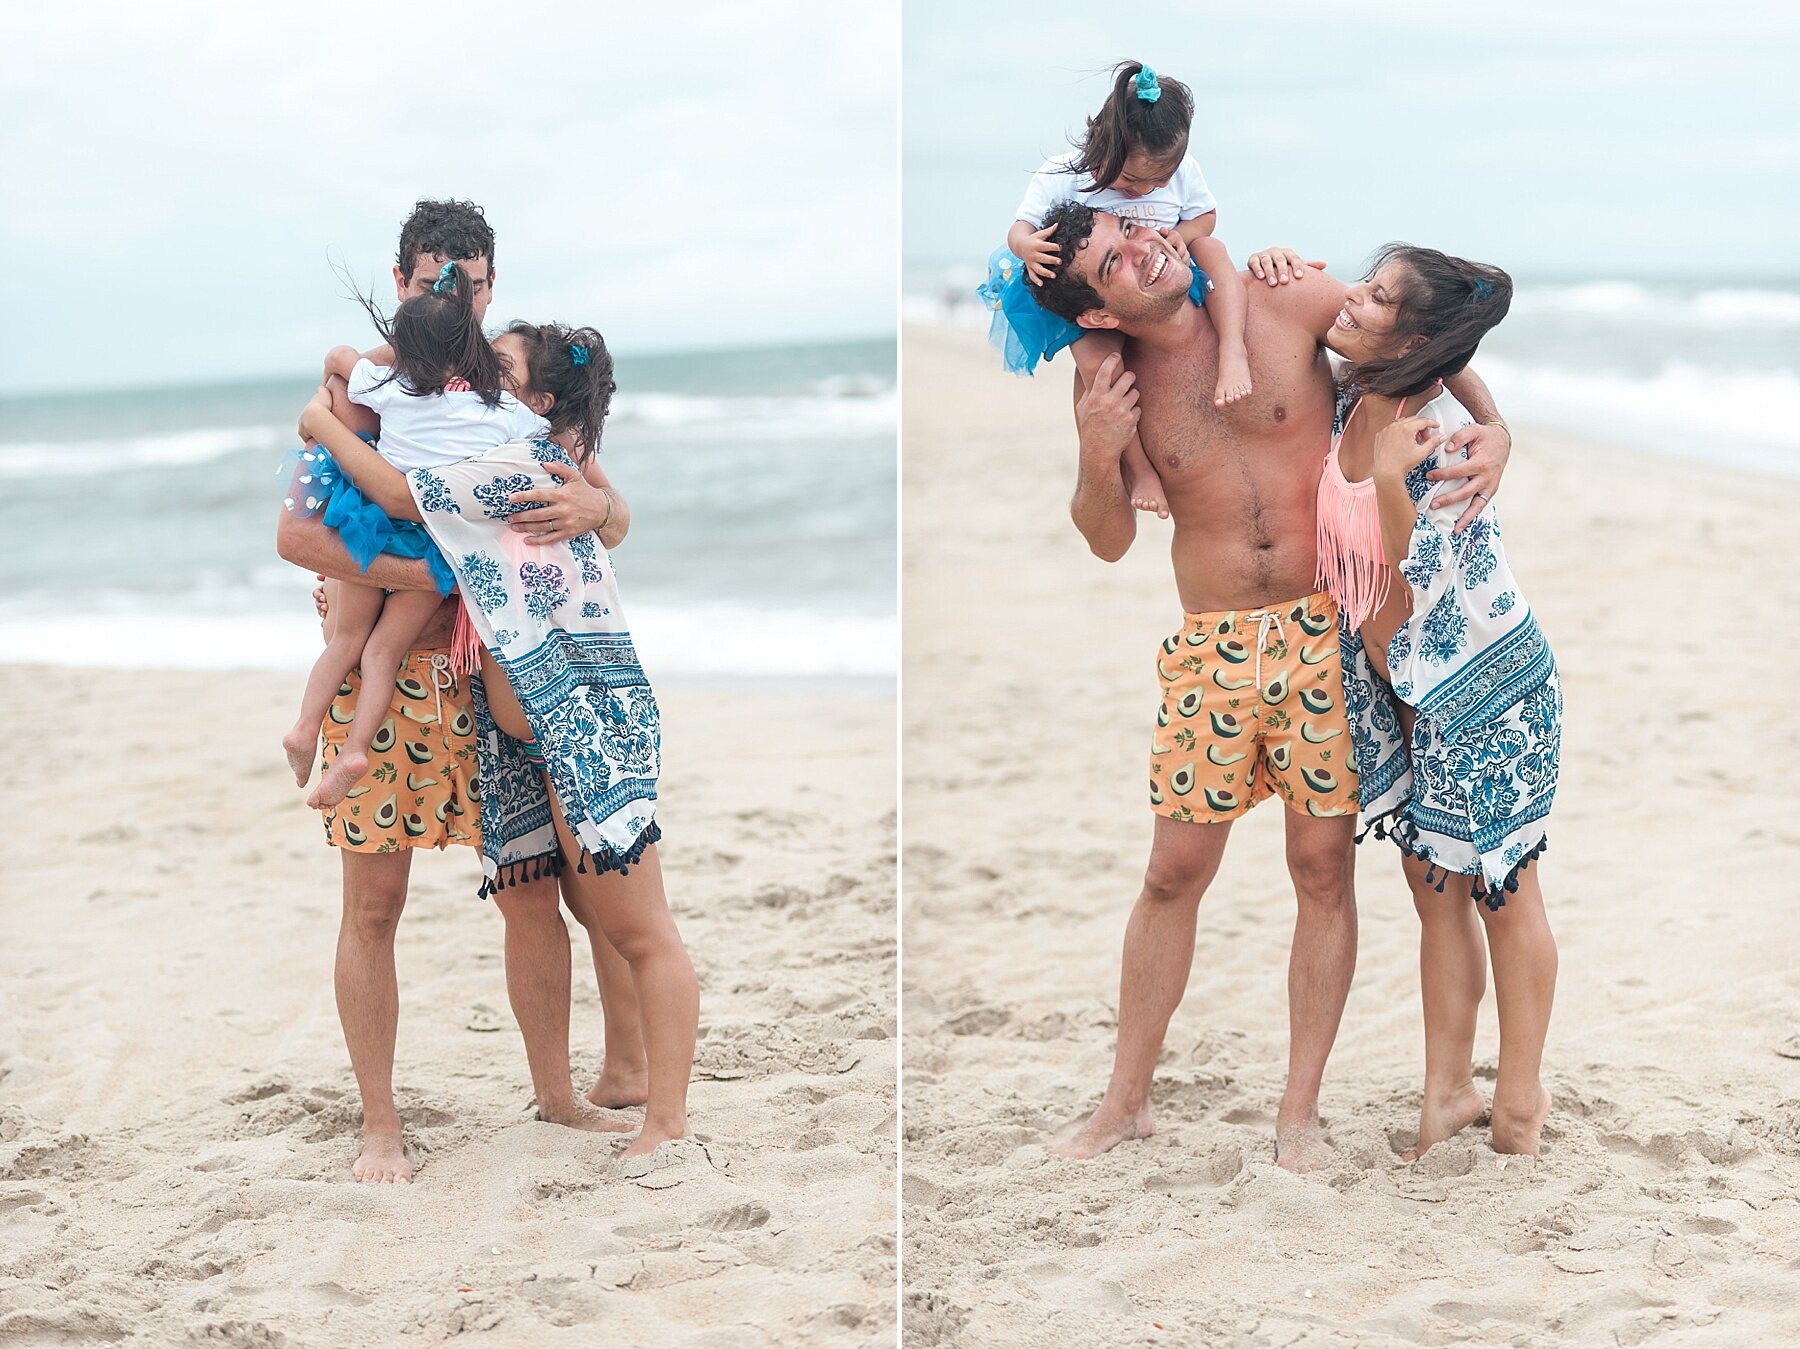 Wendy Zook Photography | Outer Banks maternity announcement, maternity, pregnancy announcement, Outer Banks pregnancy announcement, Frederick MD maternity photographer, Frederick maternity photographer, new baby, baby announcement